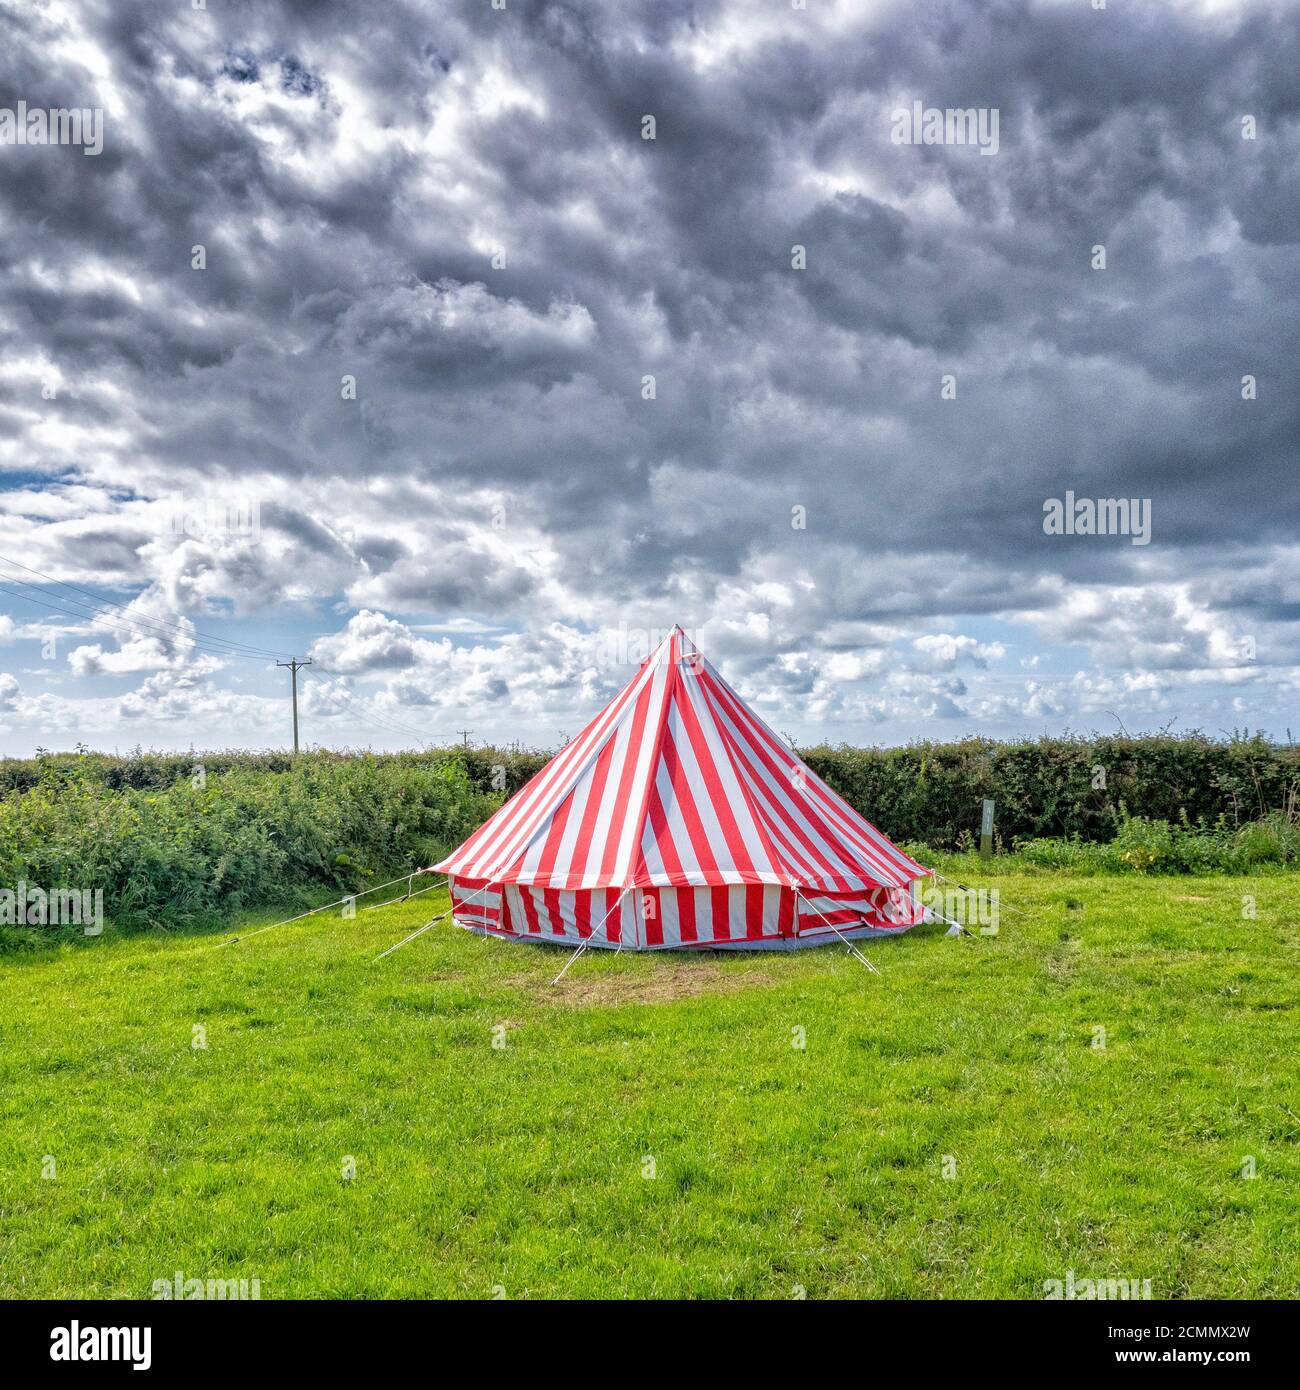 A brightly coloured red and white striped tent in a a campsite in the UK Stock Photo